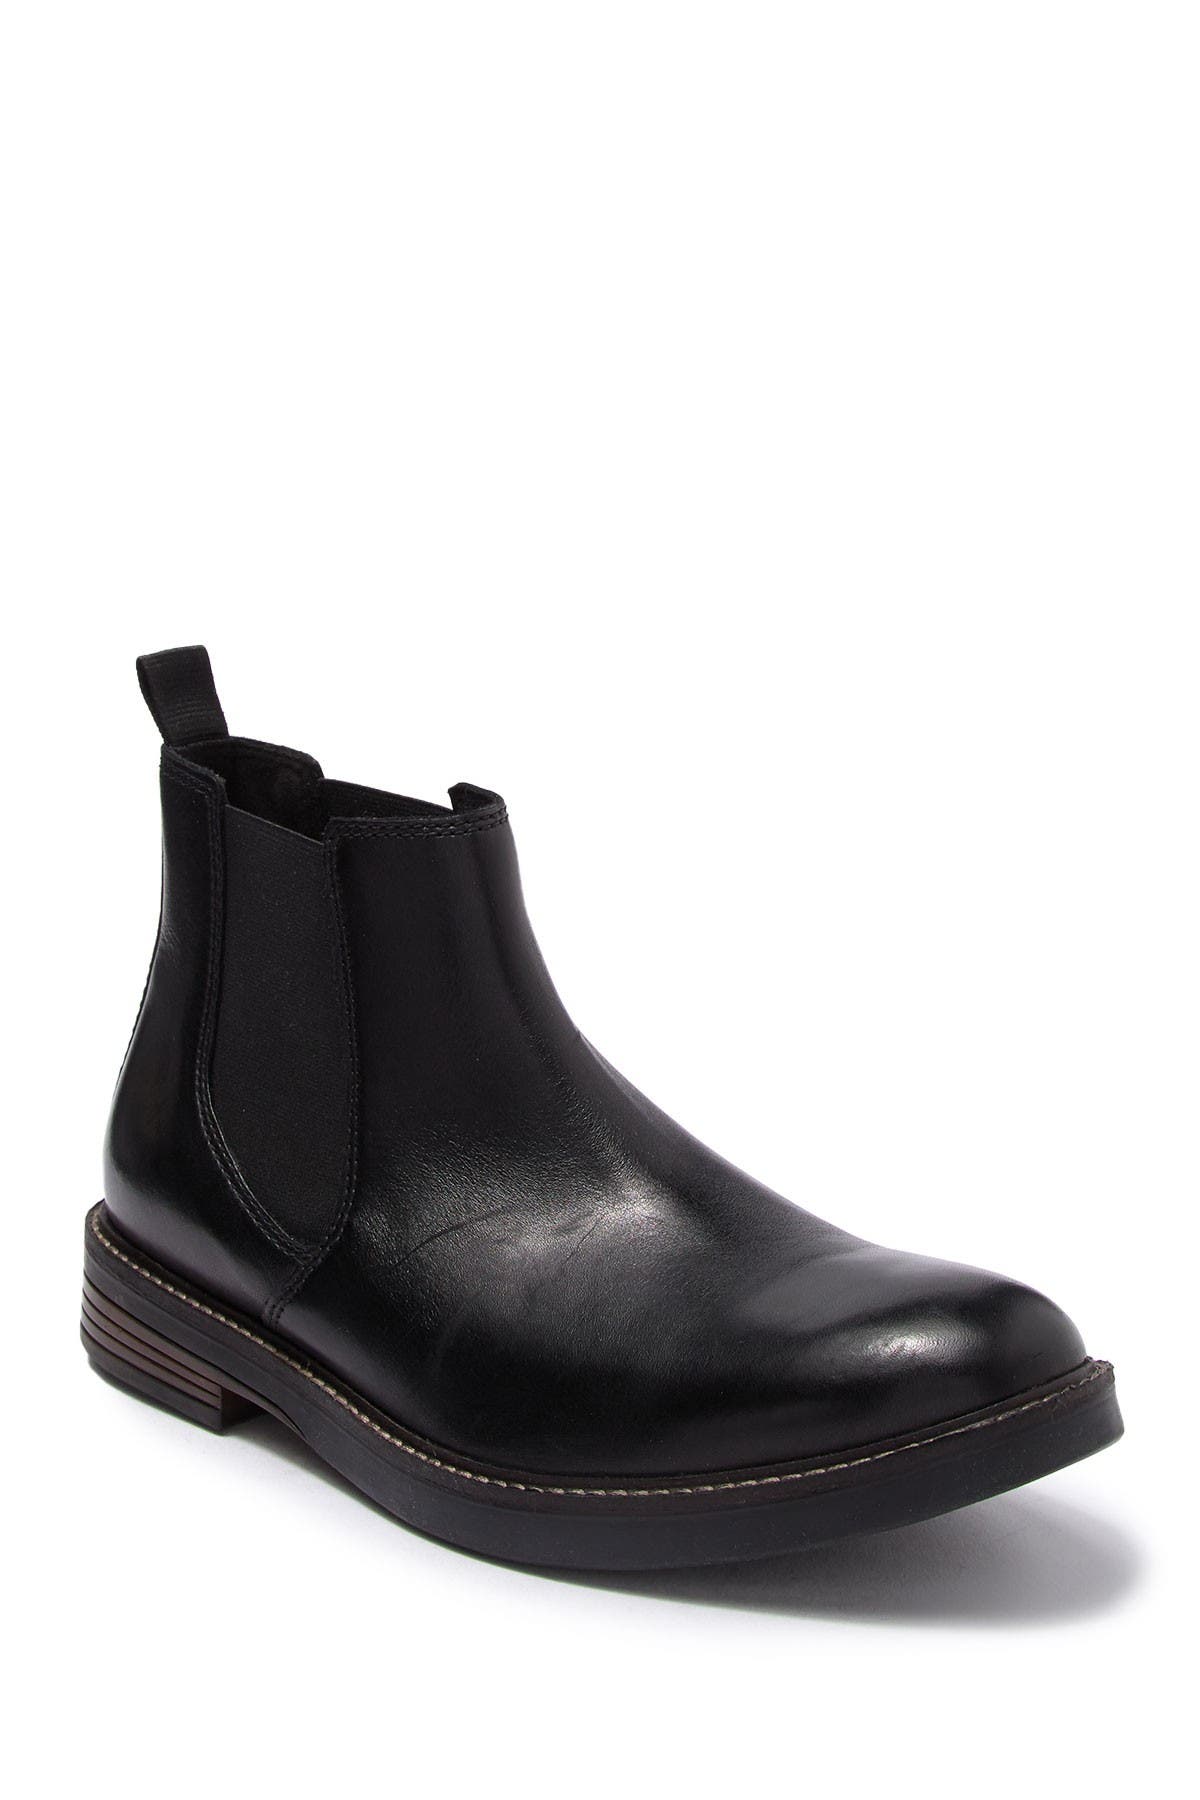 clarks black leather chelsea boots